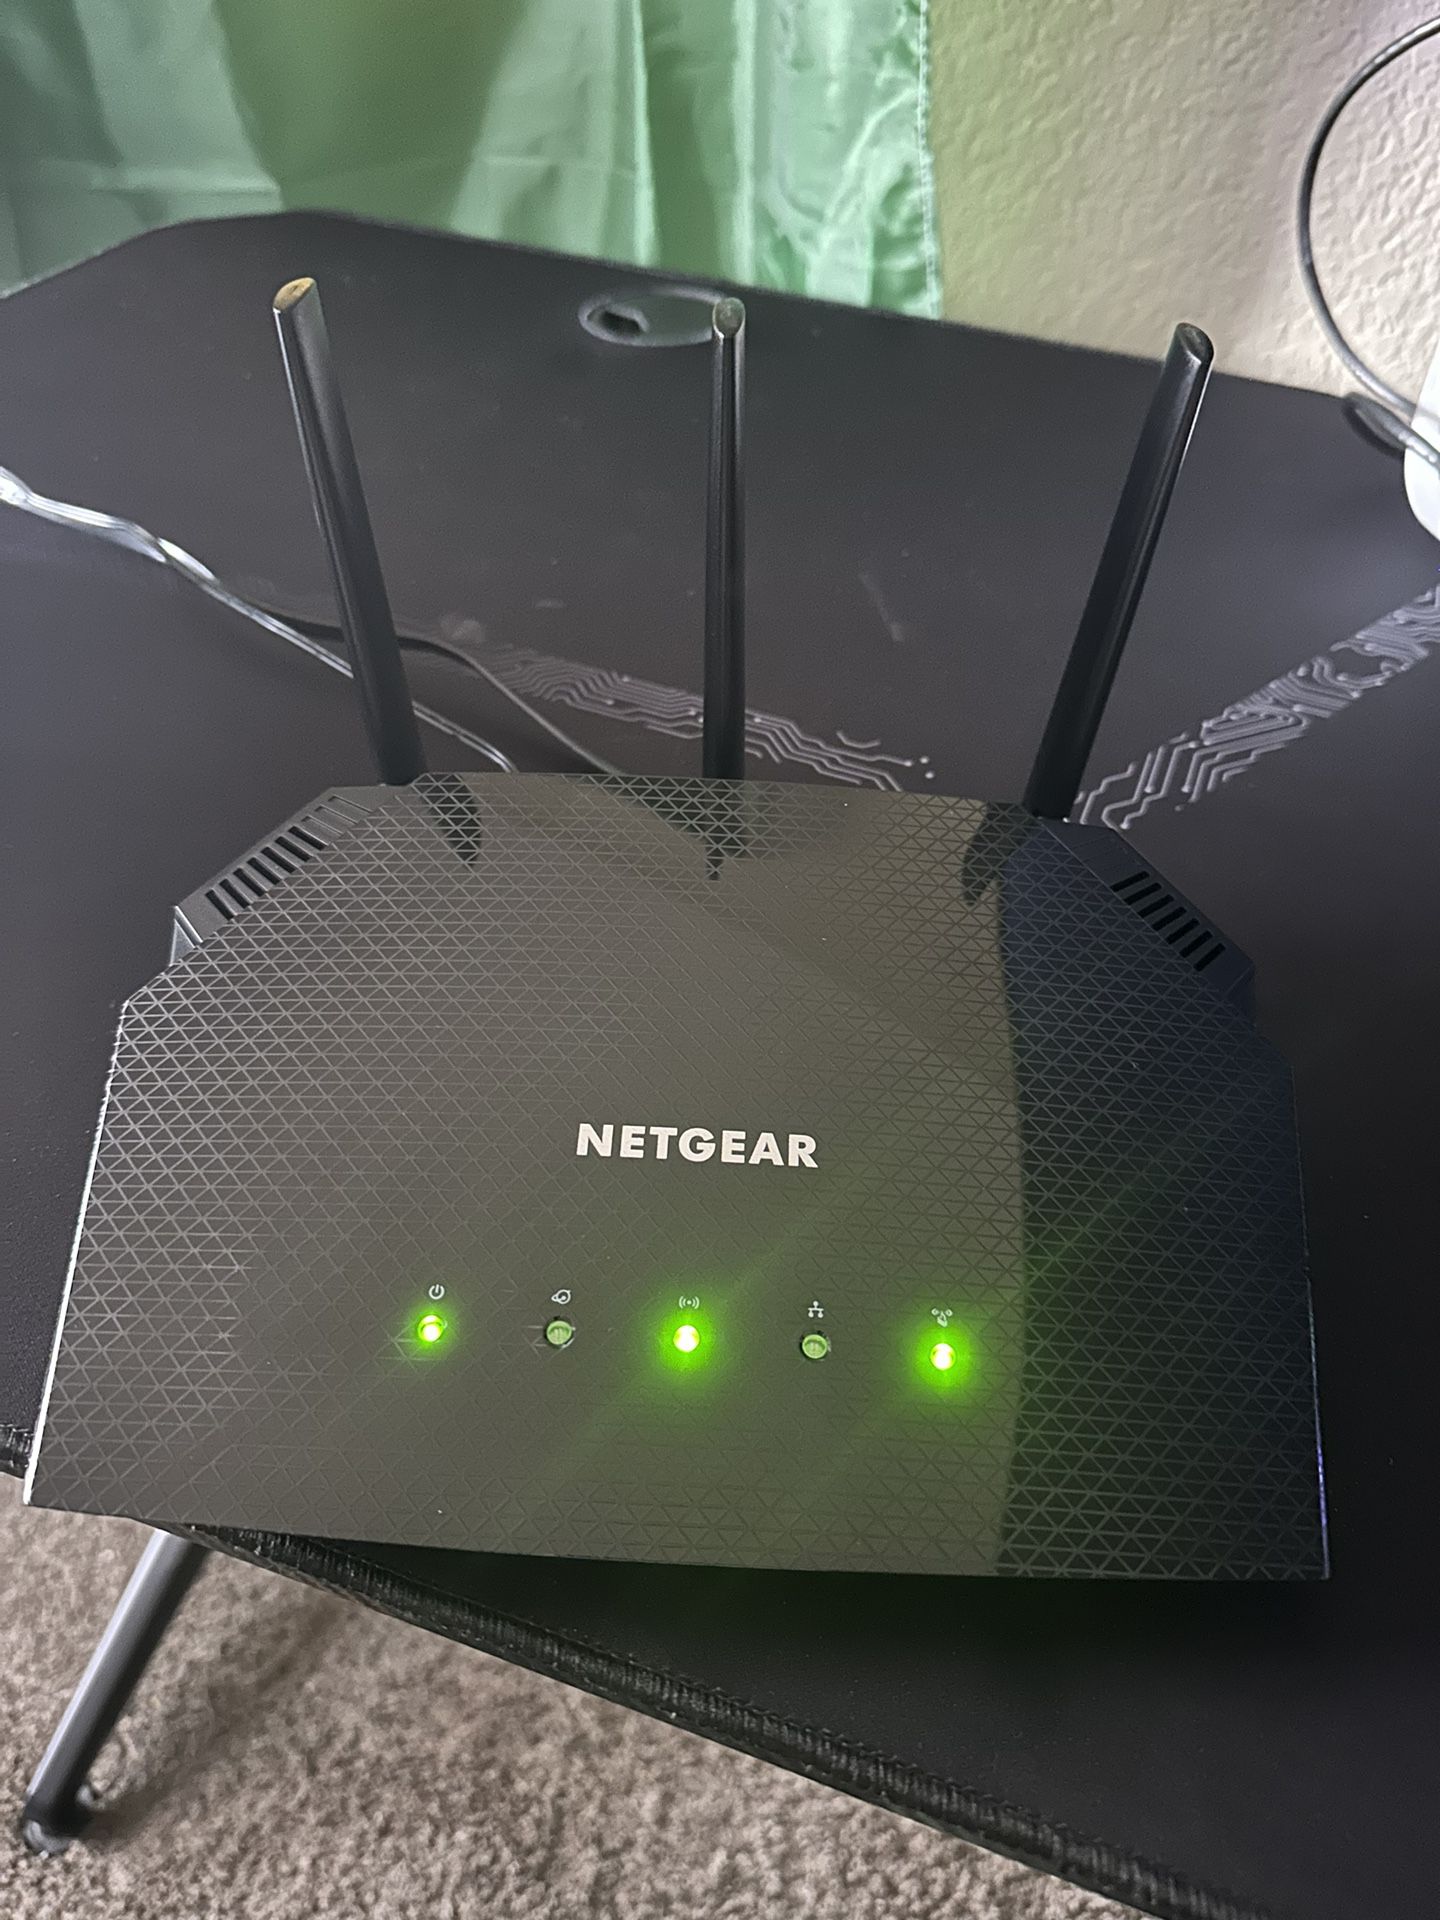 AX1800 WiFi Router